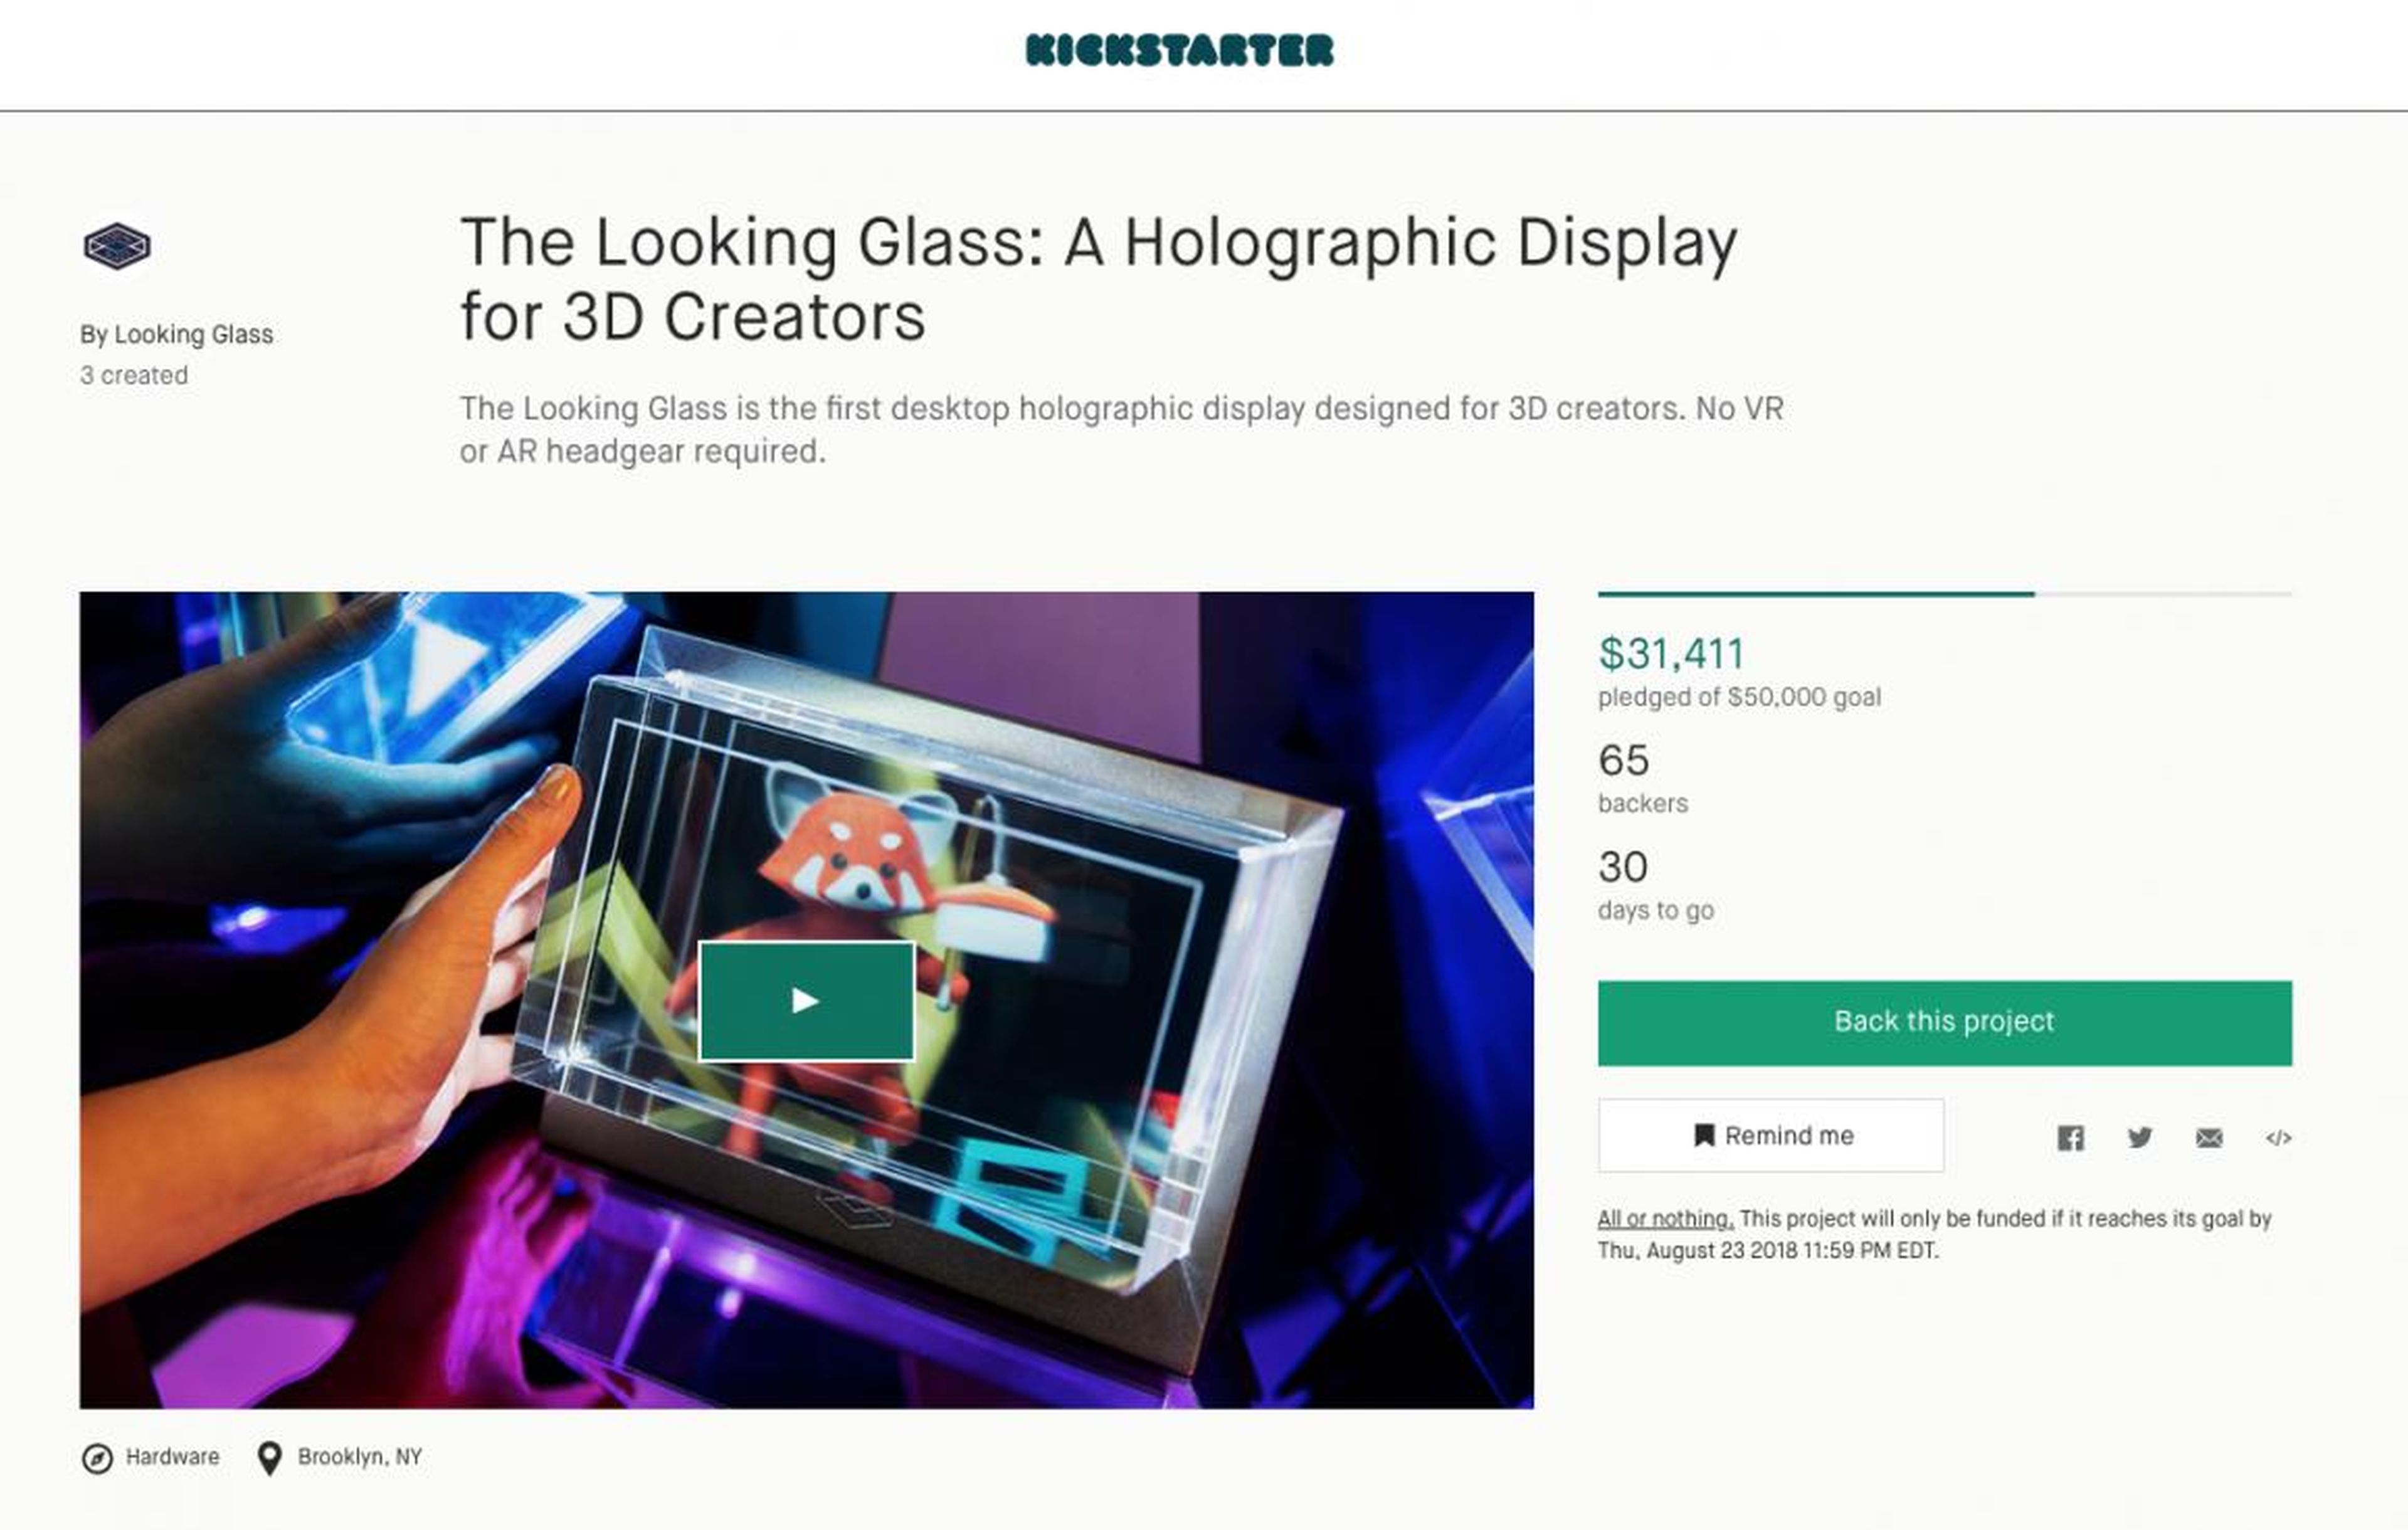 If that's a future that appeals to you, or you're a 3D designer, you can pre-order your Looking Glass on Kickstarter. They're aiming to deliver them by December.